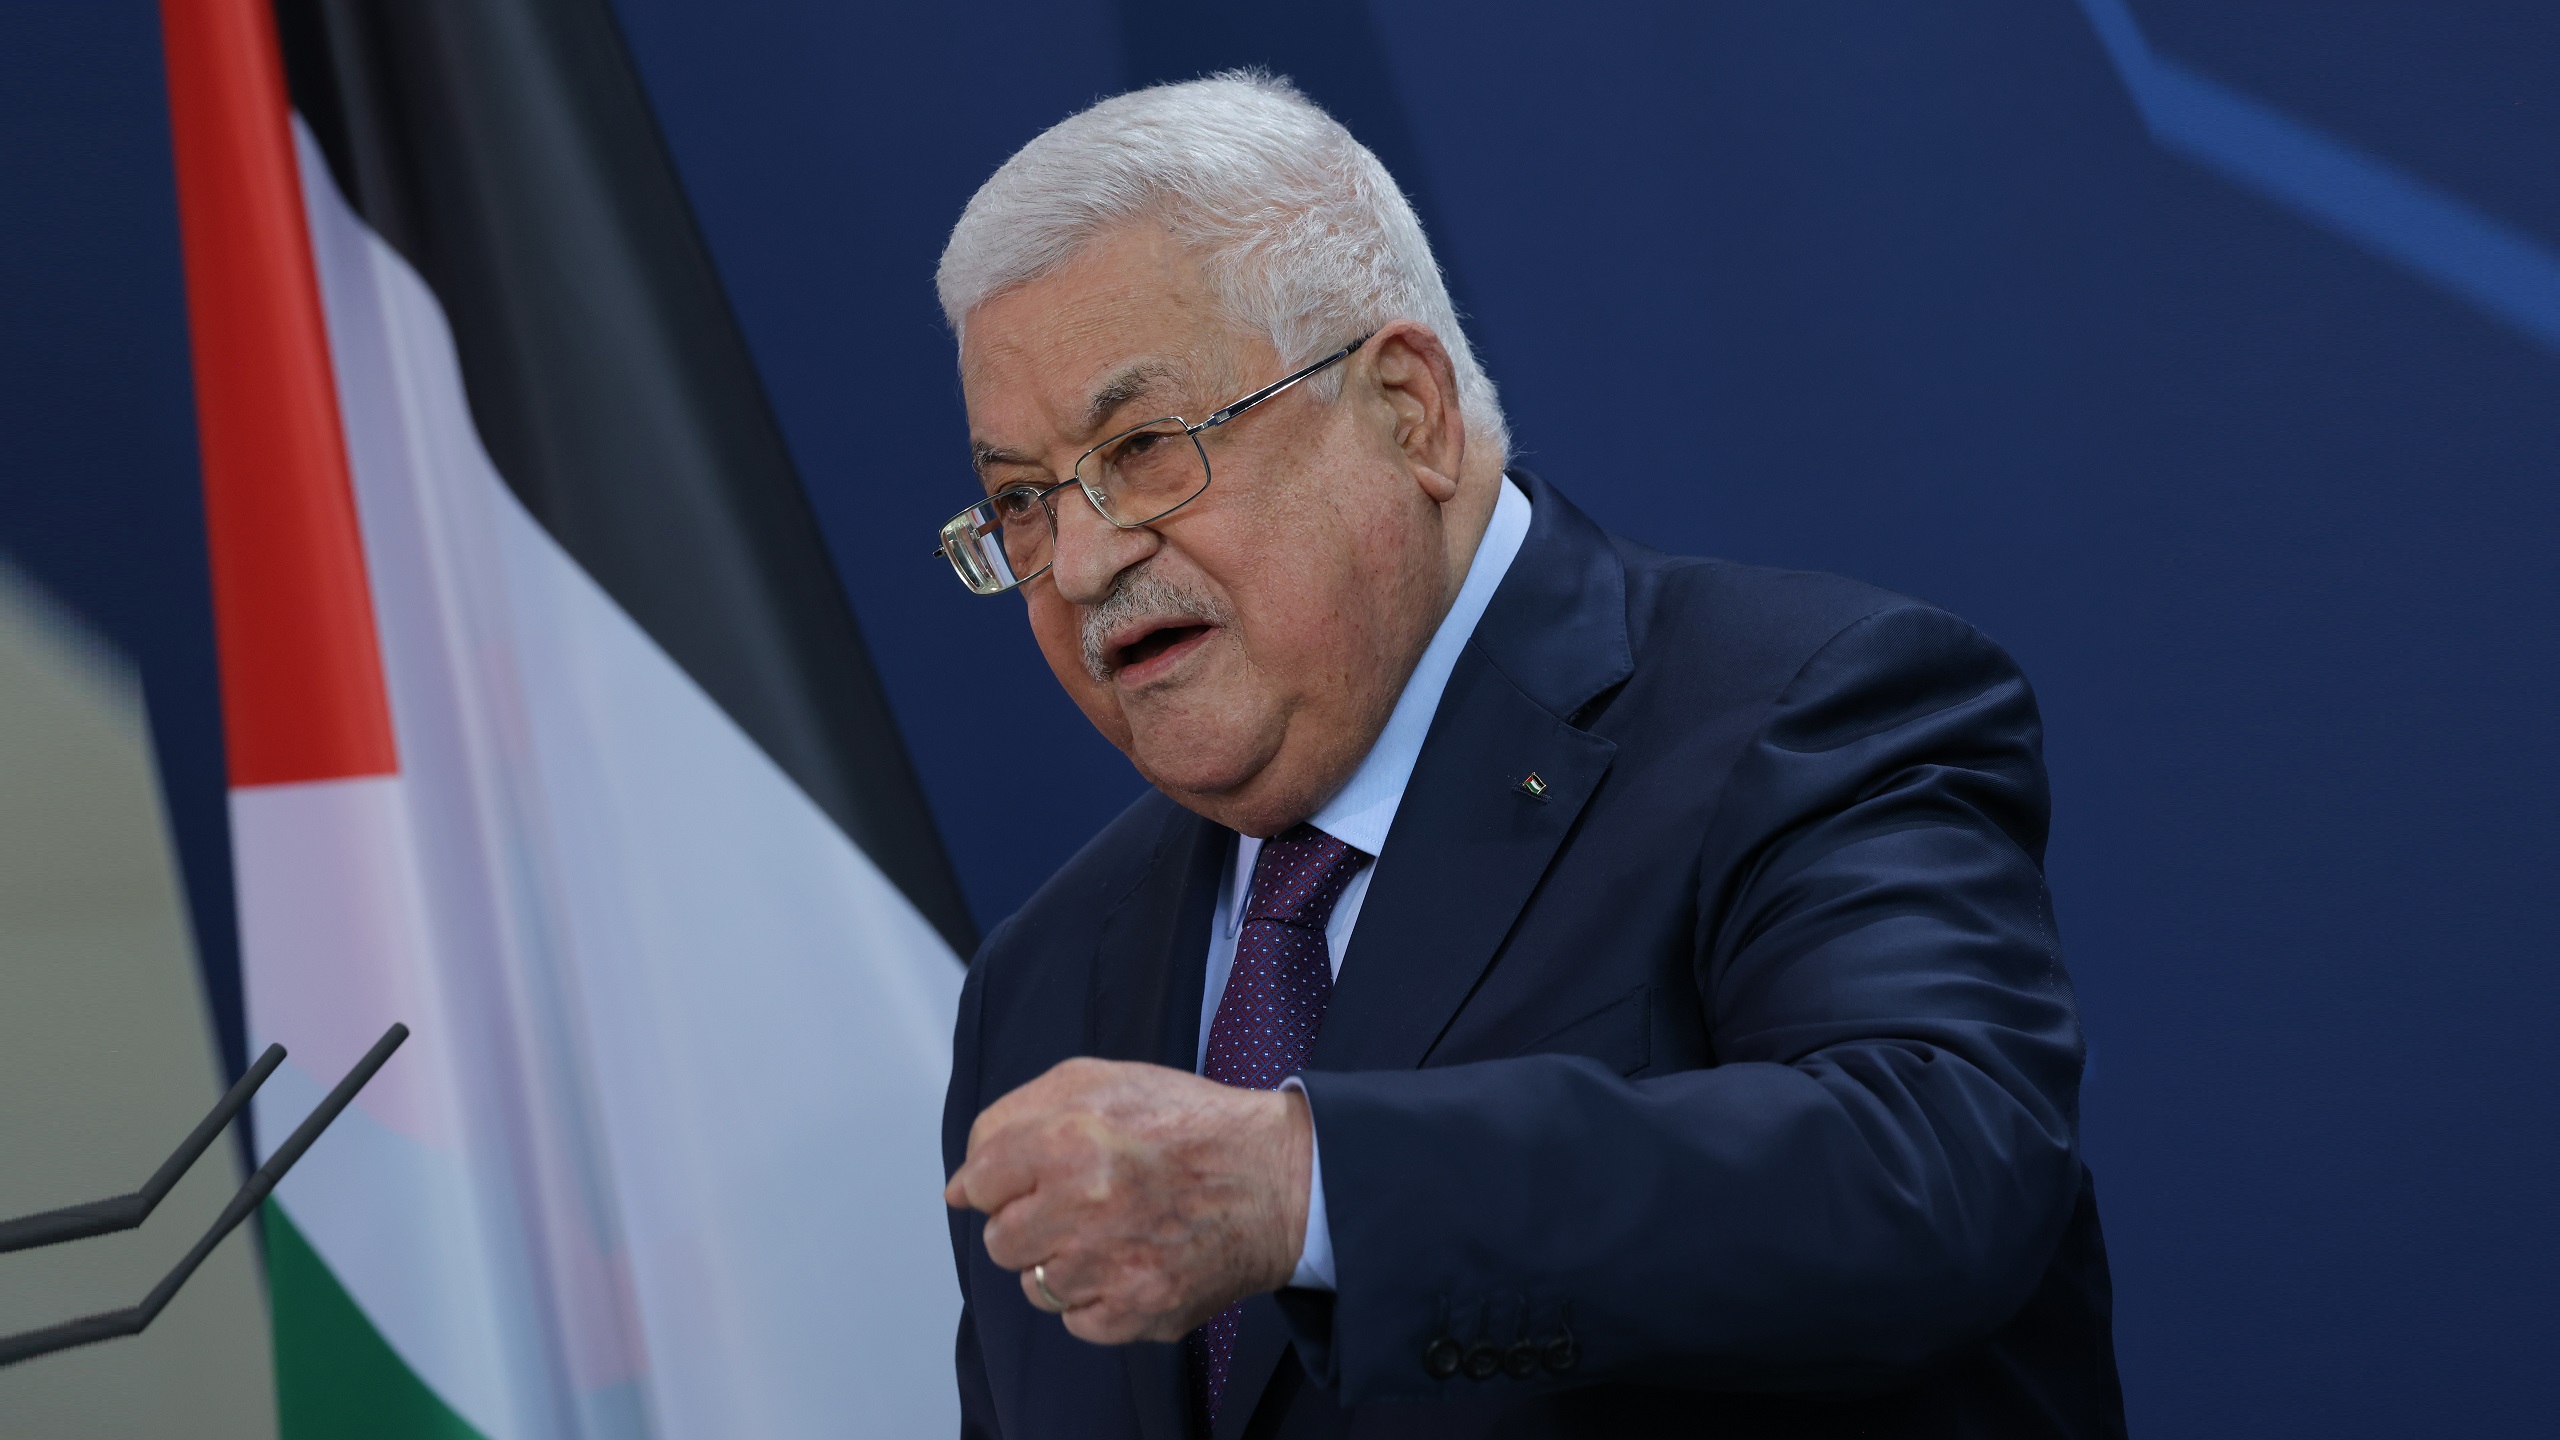 The Day After Abbas